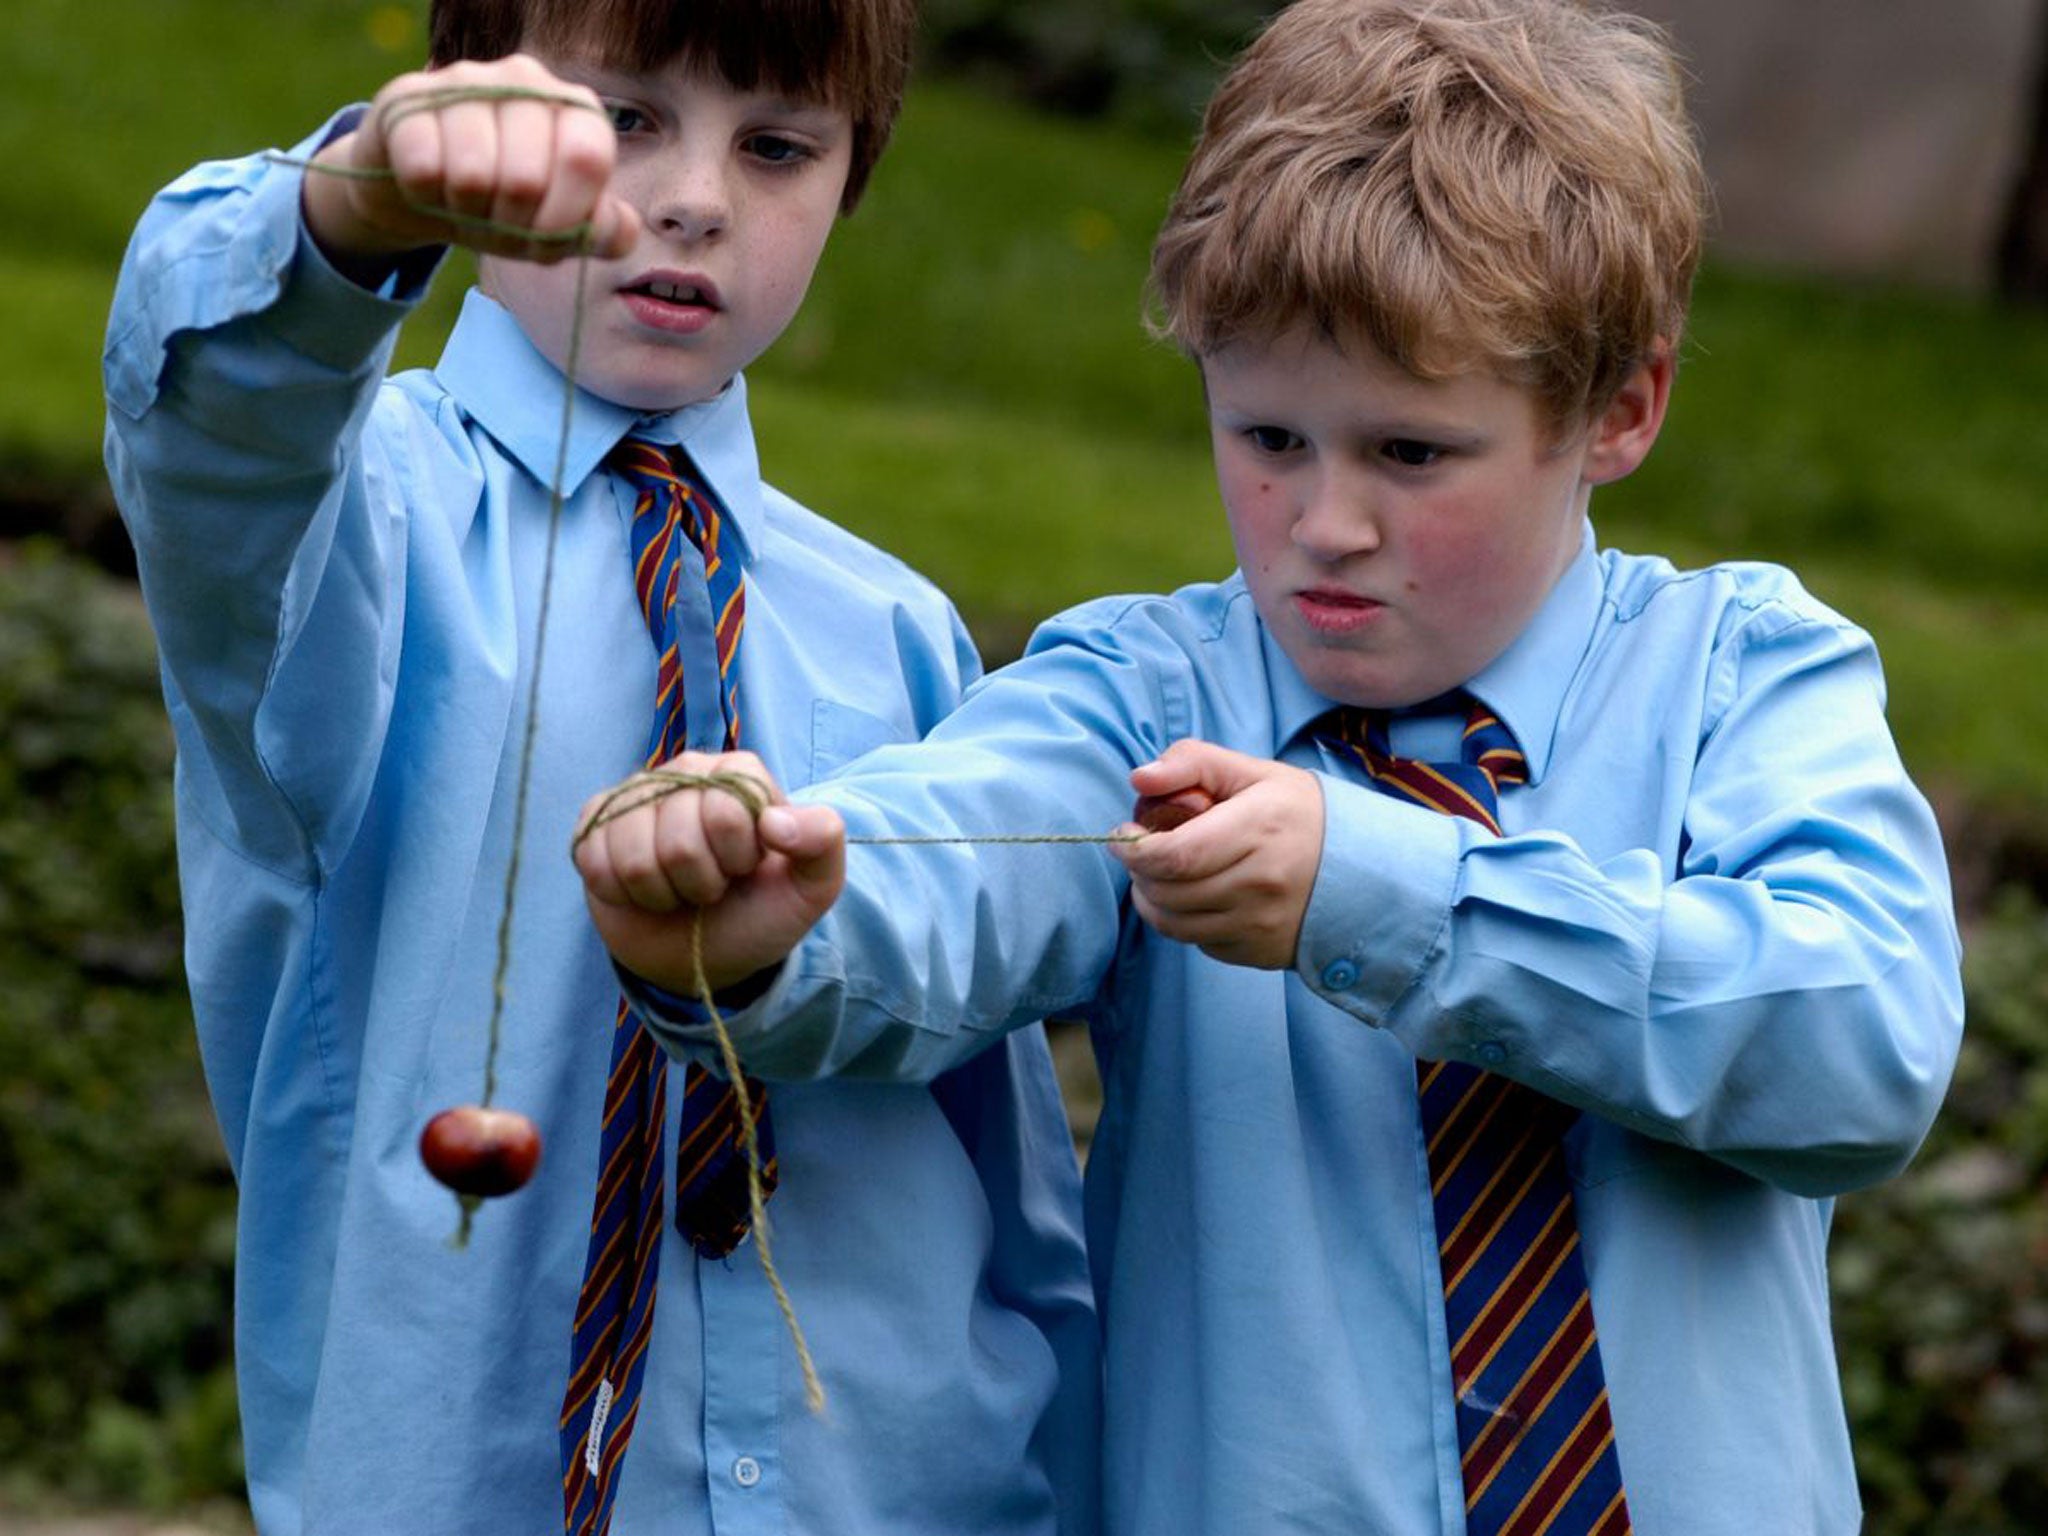 Traditional conker matches between schoolchildren are banned as they represent a safety risk